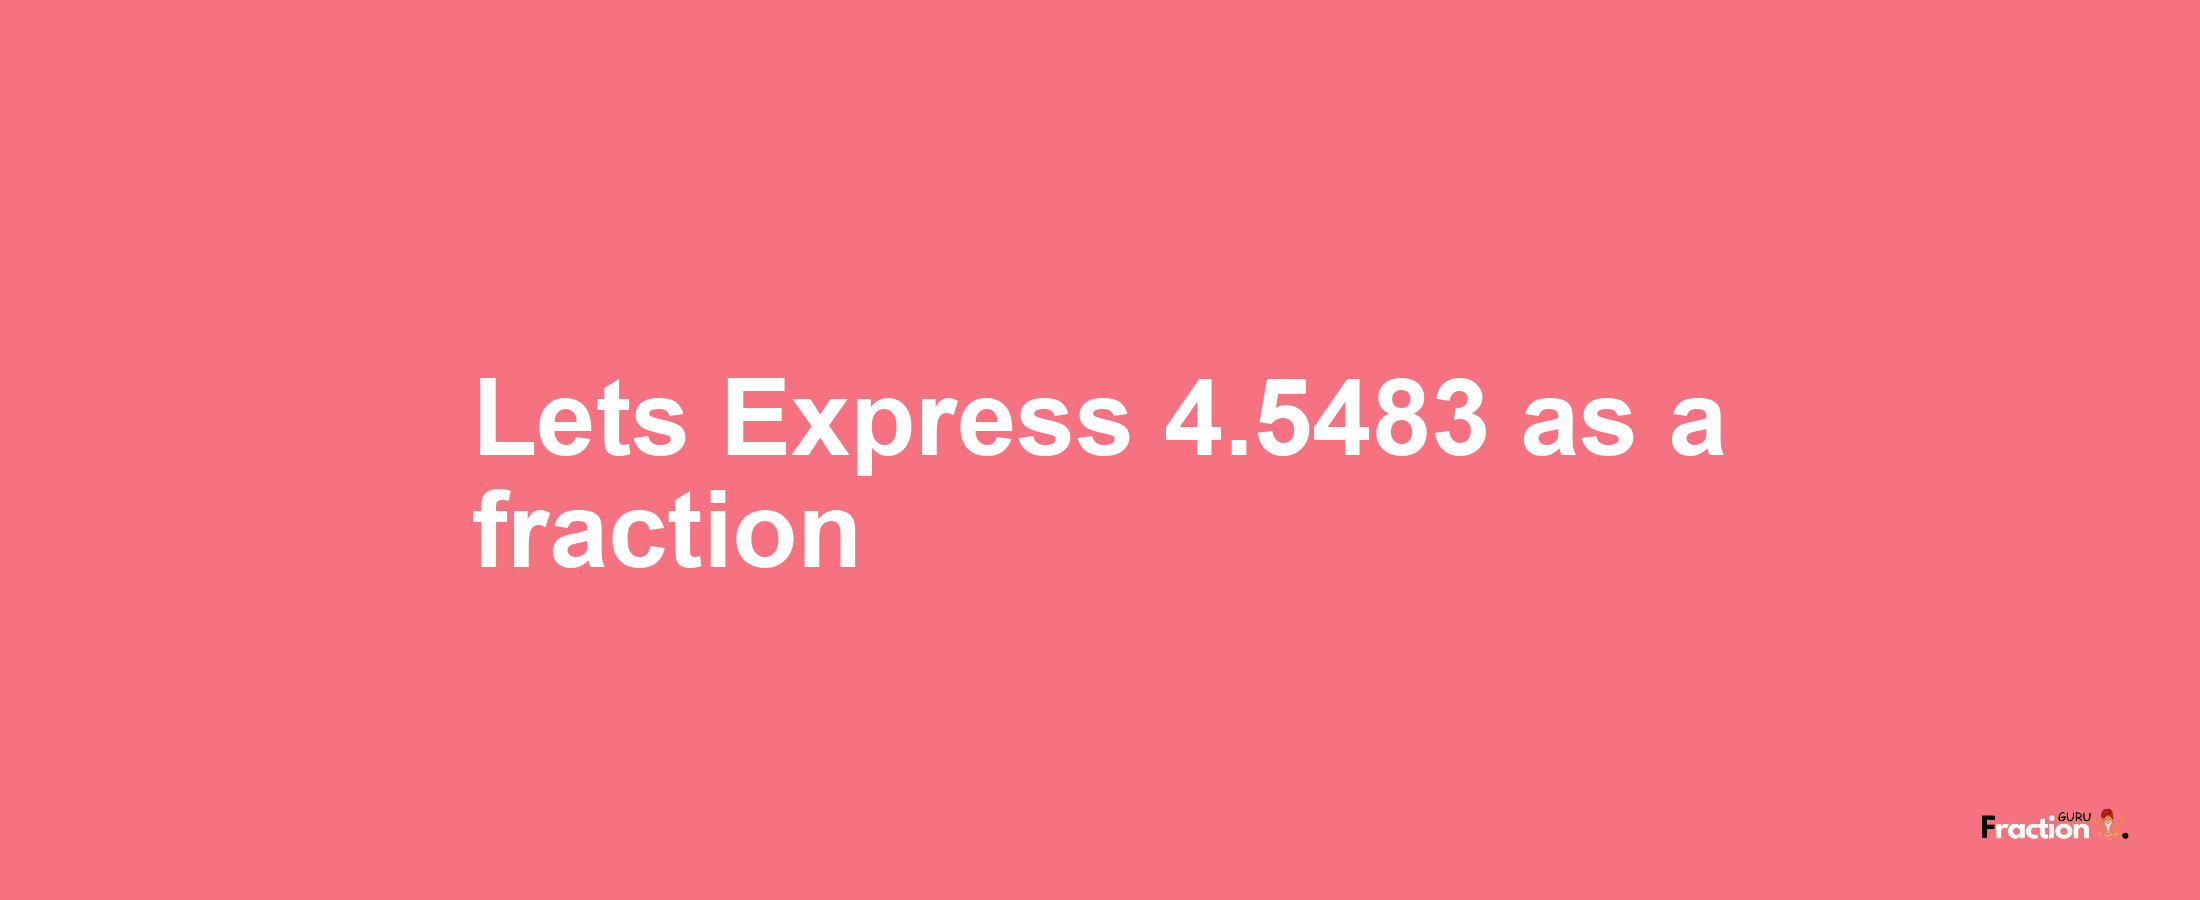 Lets Express 4.5483 as afraction